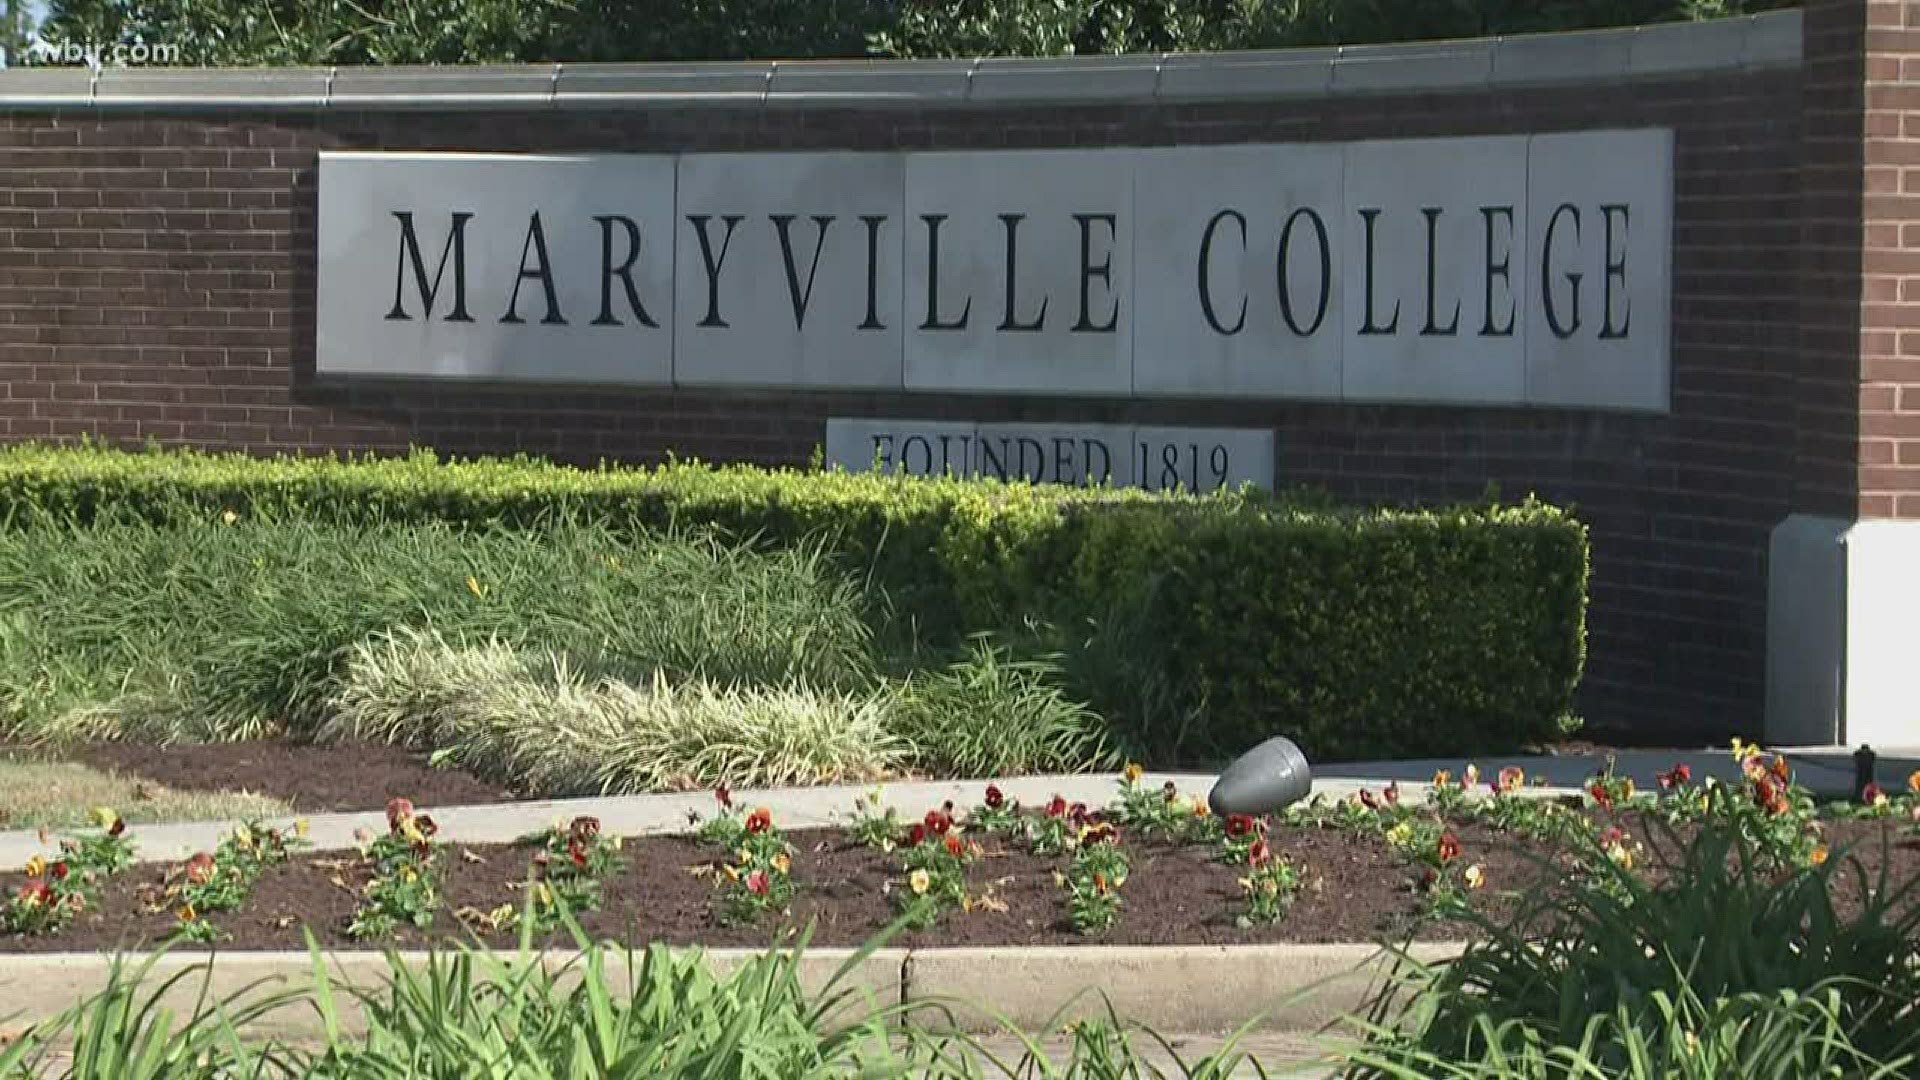 Maryville College is offering free housing to health care